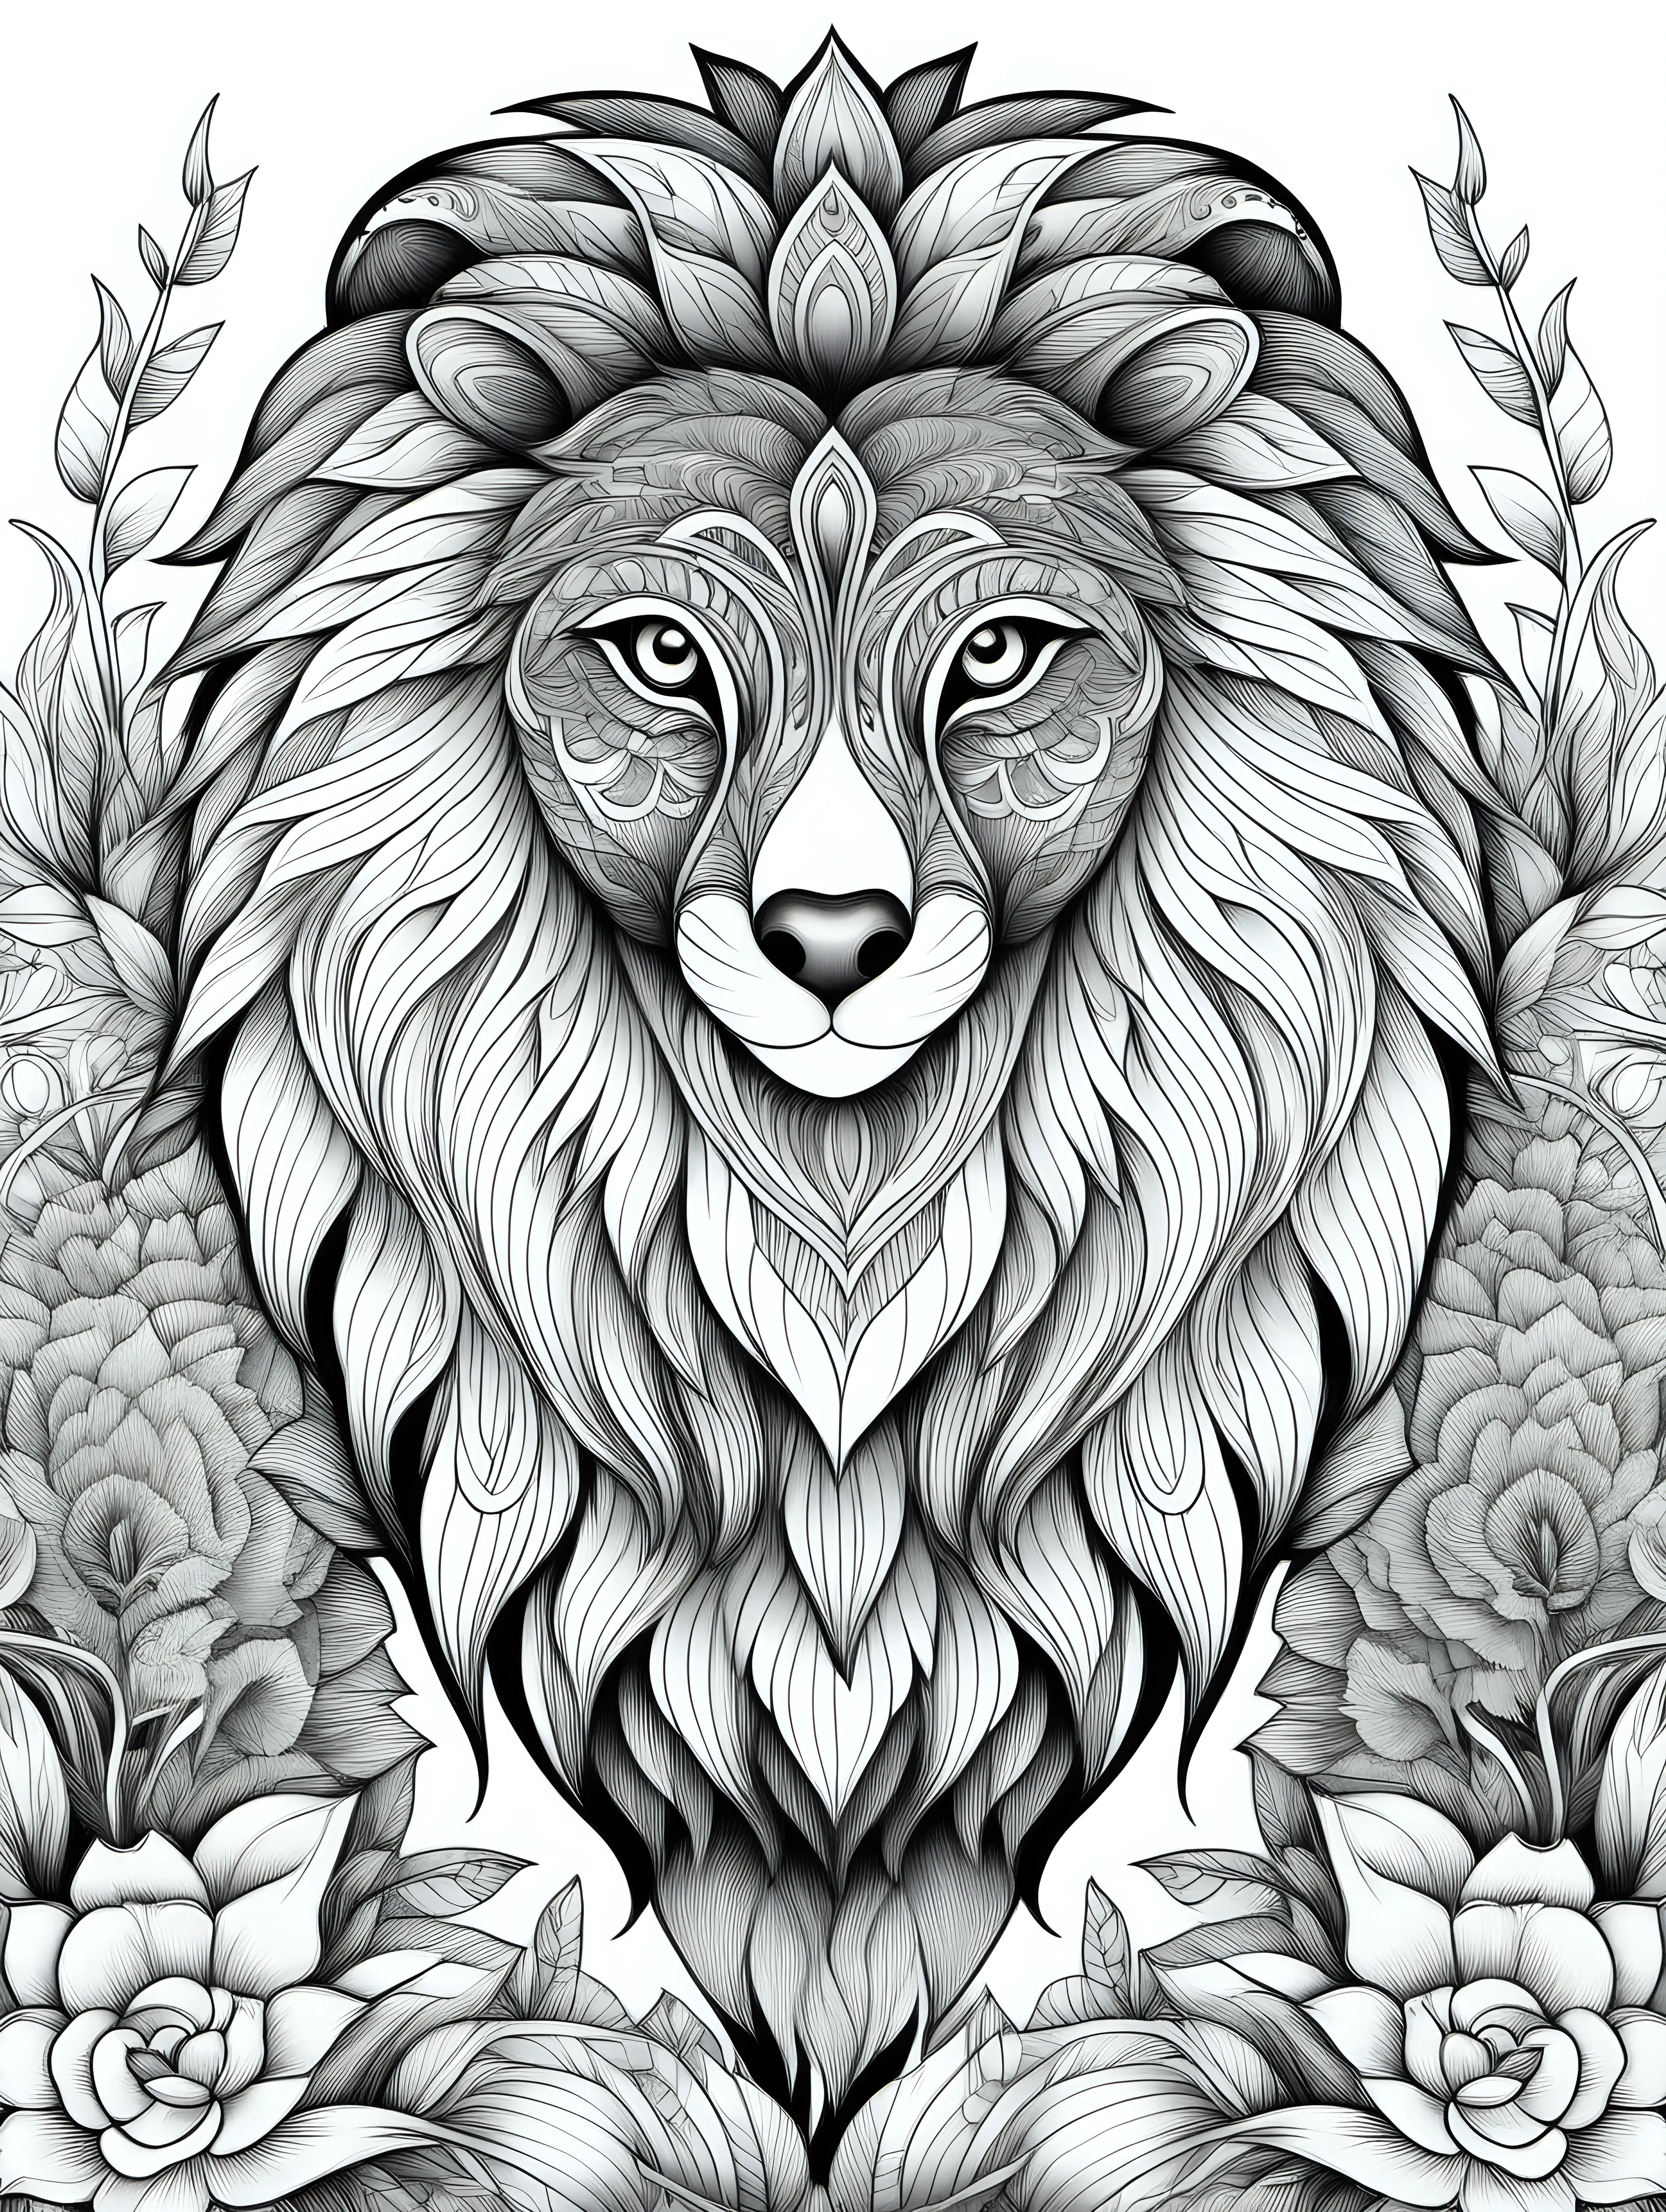 Detailed Animal Coloring Pages for Adults Intricate BlackandWhite Designs on a Clean White Background